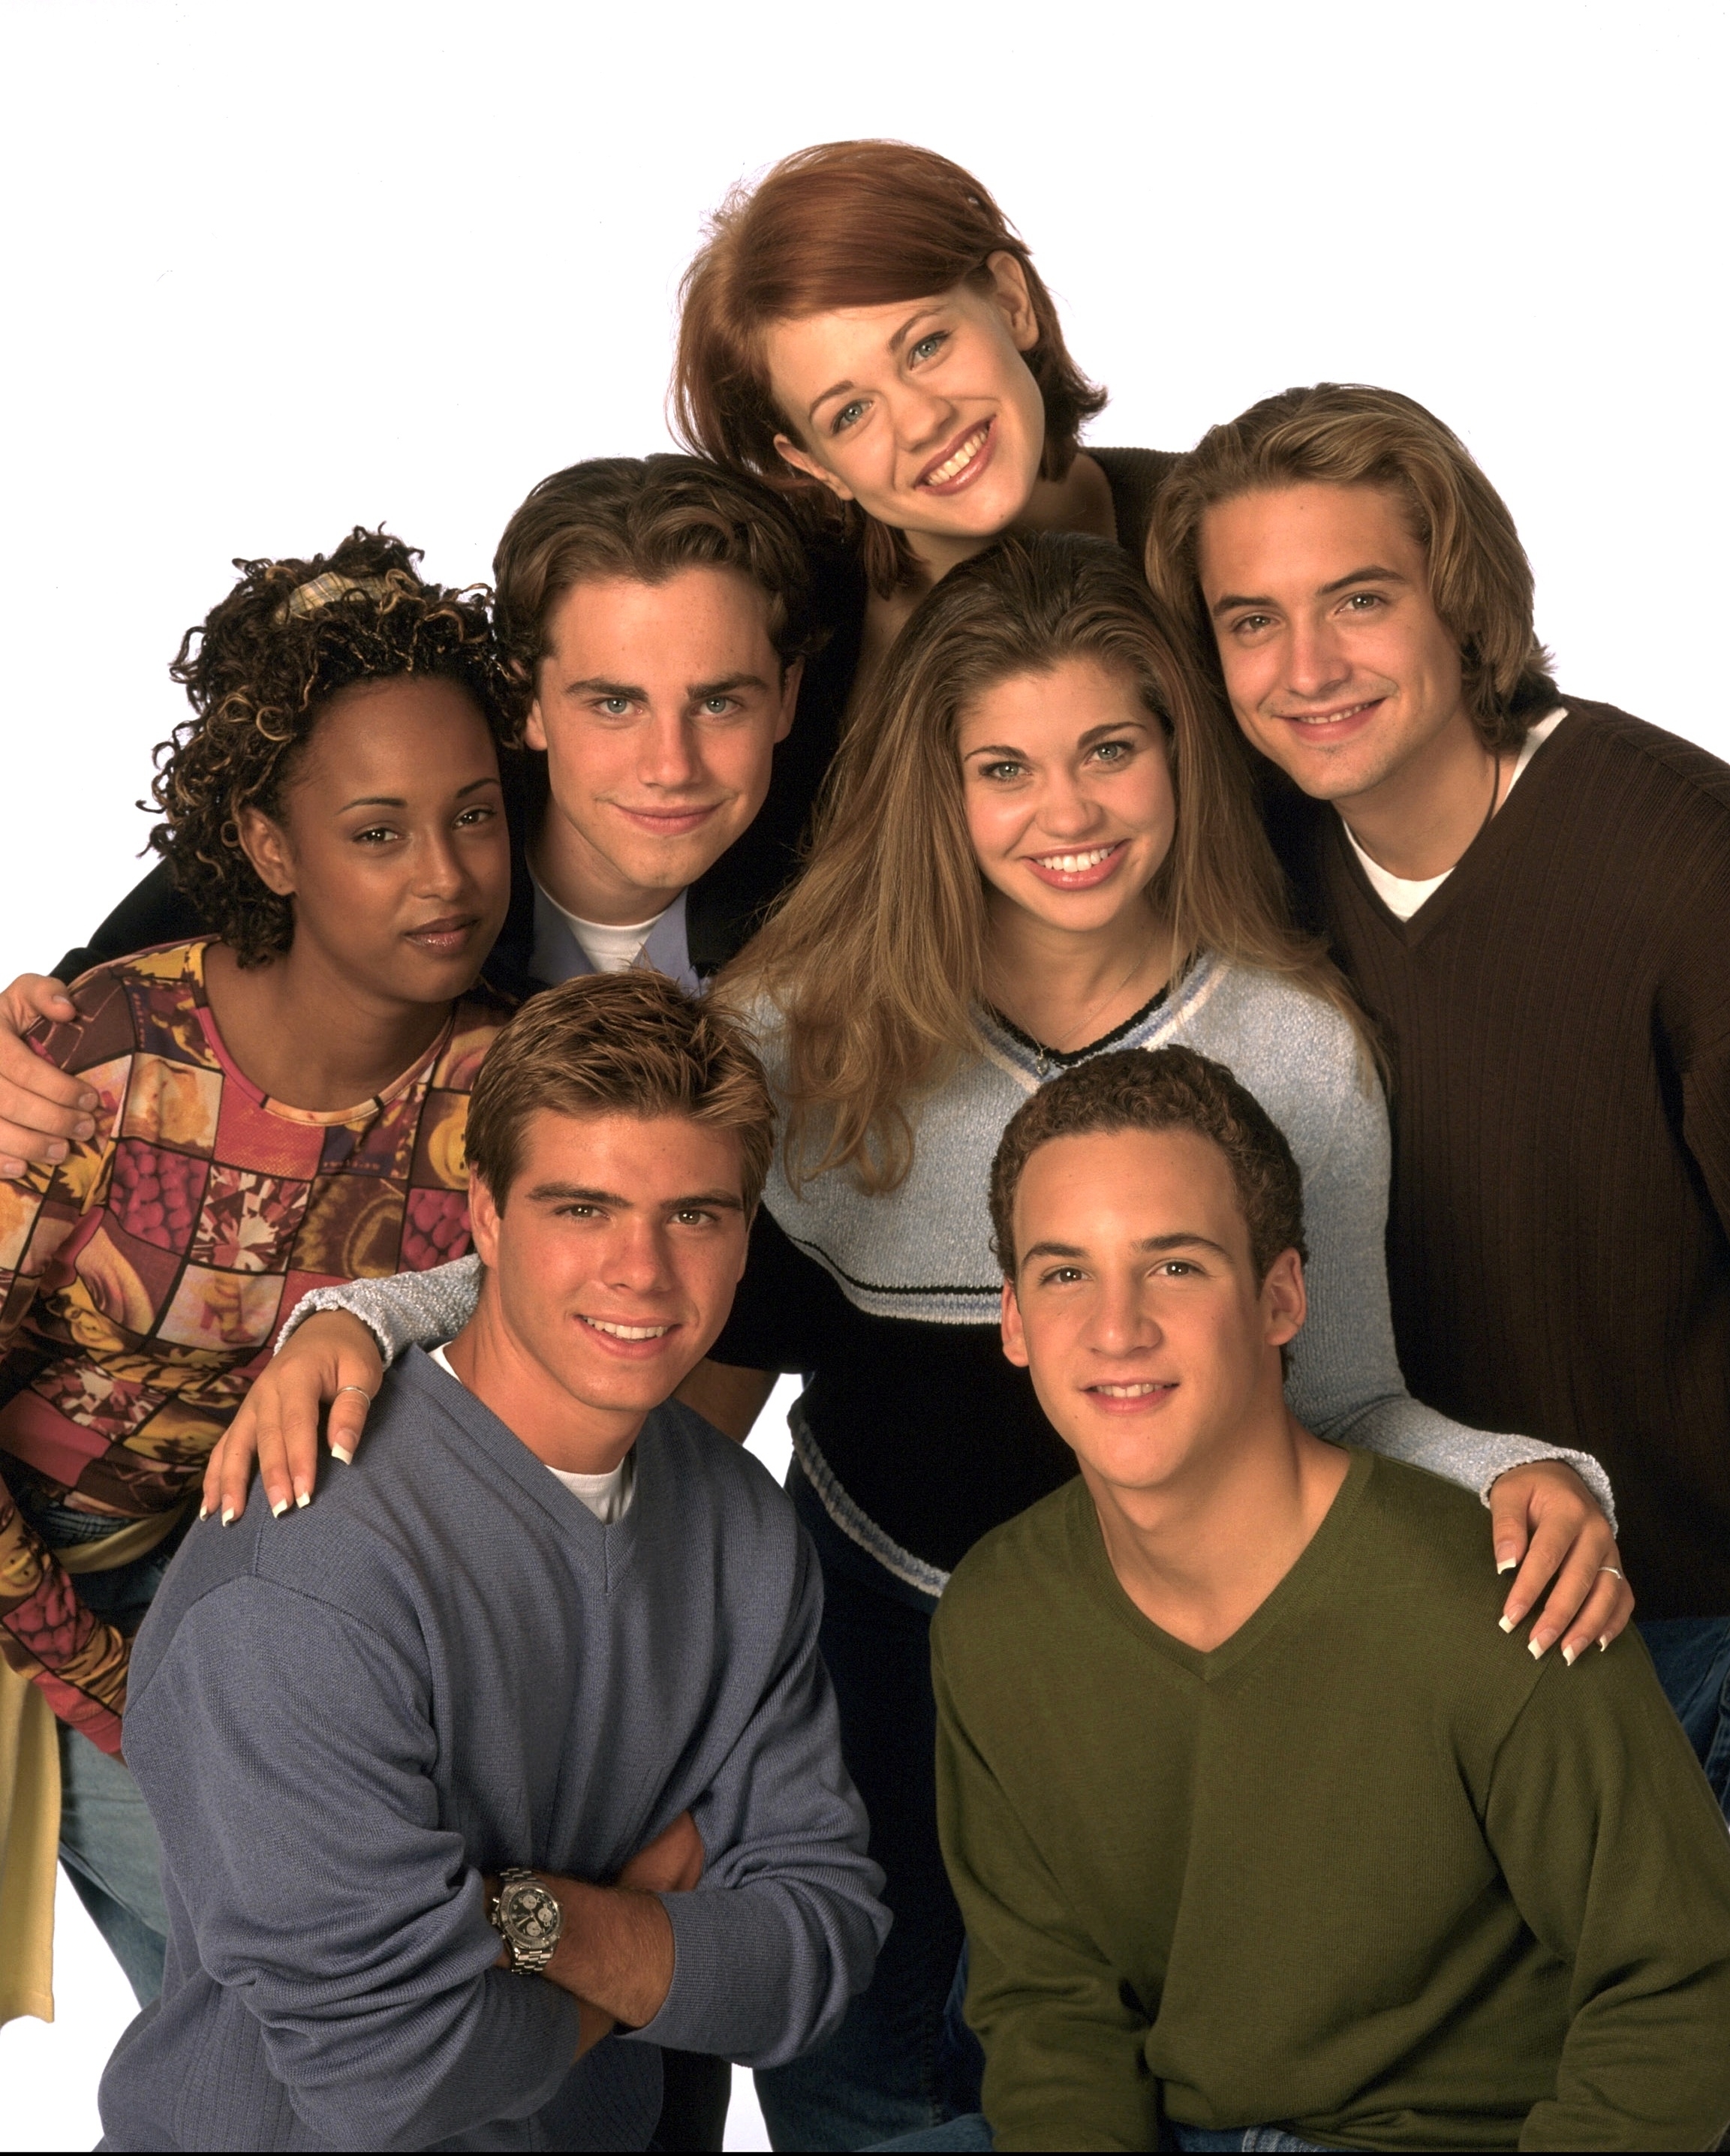 Group photo of seven people: Trina McGee, Will Friedle, Danielle Fishel, Rider Strong, Matthew Lawrence, Ben Savage, and Maitland Ward